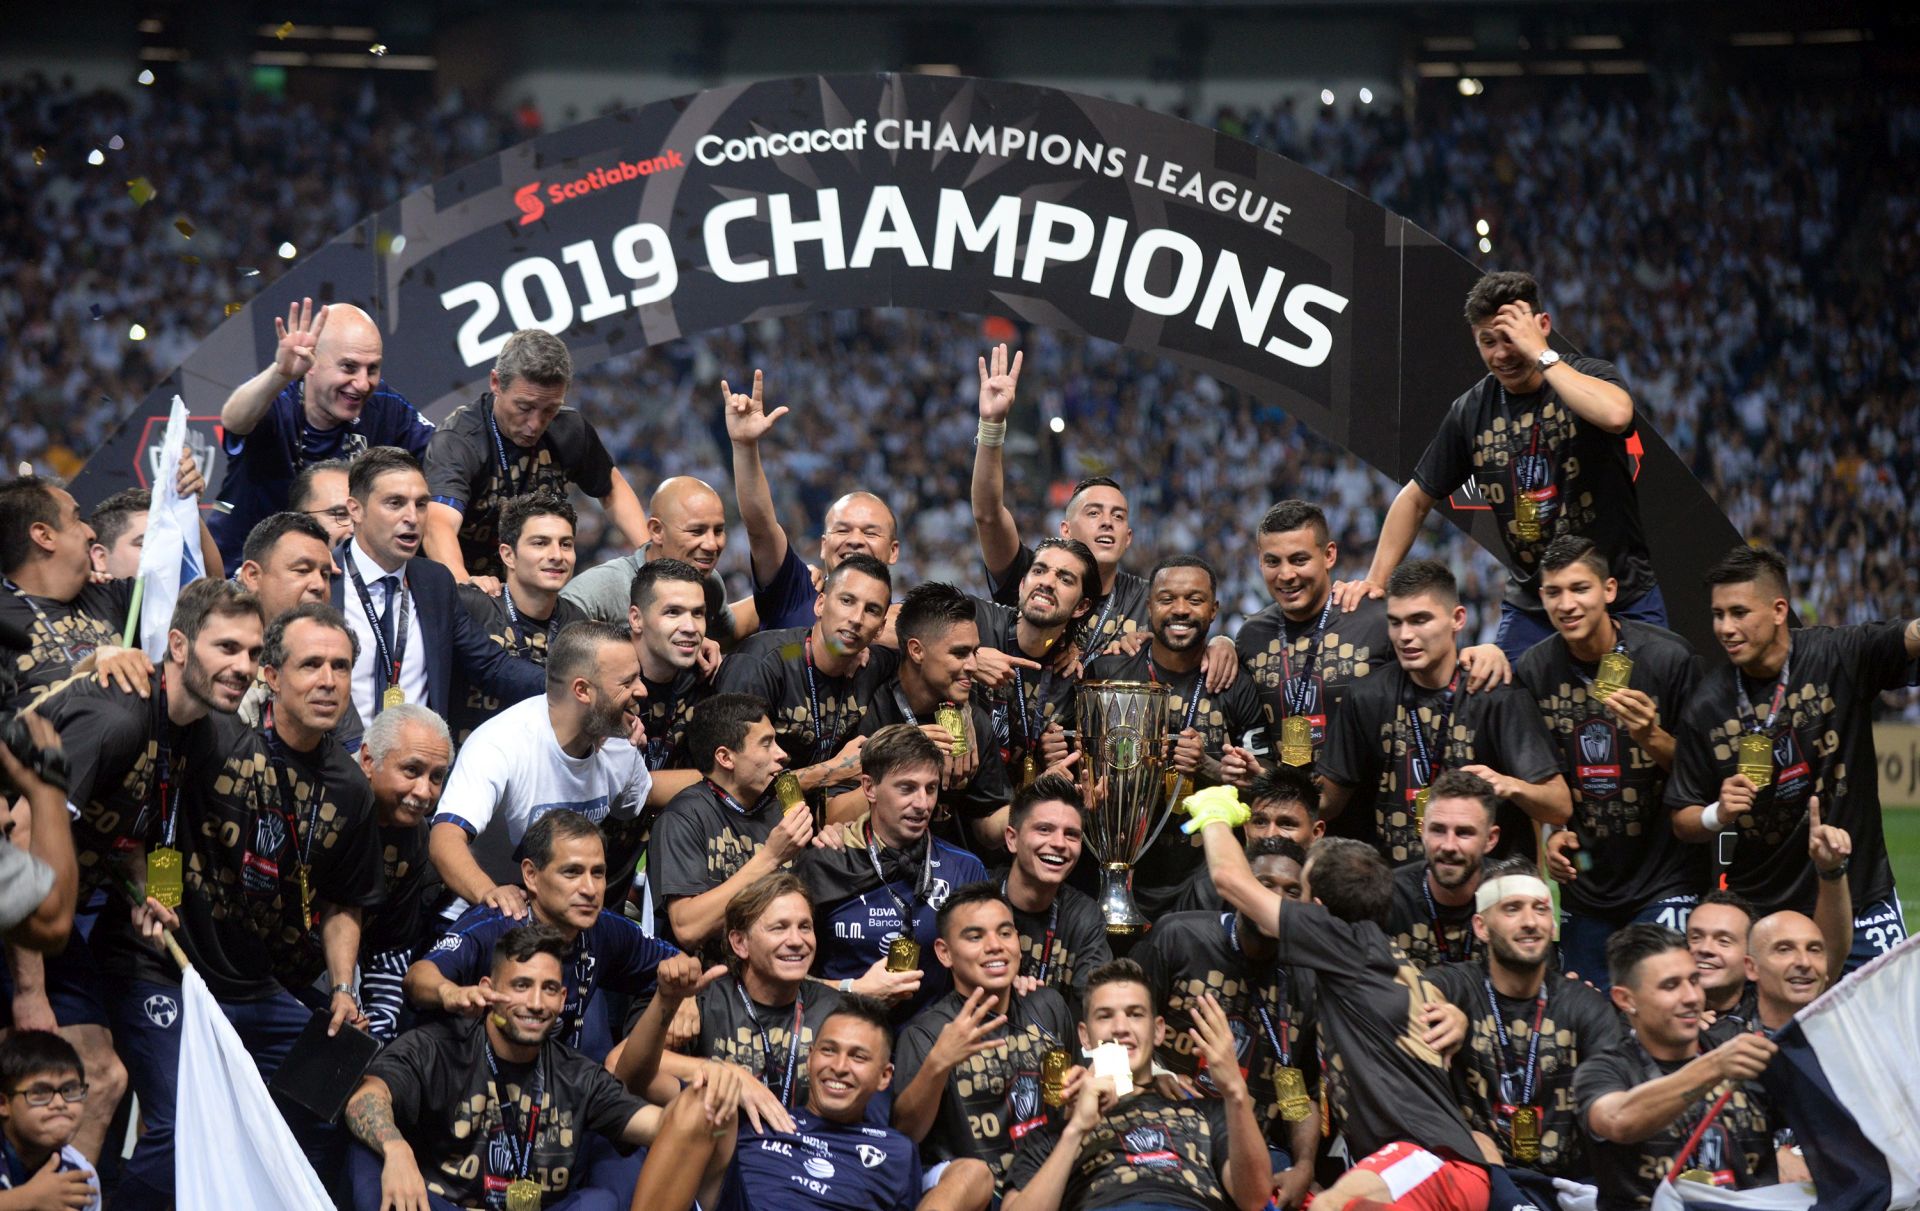 epa07541725 Monterrey players celebrate after winning the CONCACAF Champions League Final between Rayados de Monterrey and Tigres UANL, at the BBVA Stadium in Monterrey, Mexico, 01 May 2019.  EPA/MIGUEL SIERRA